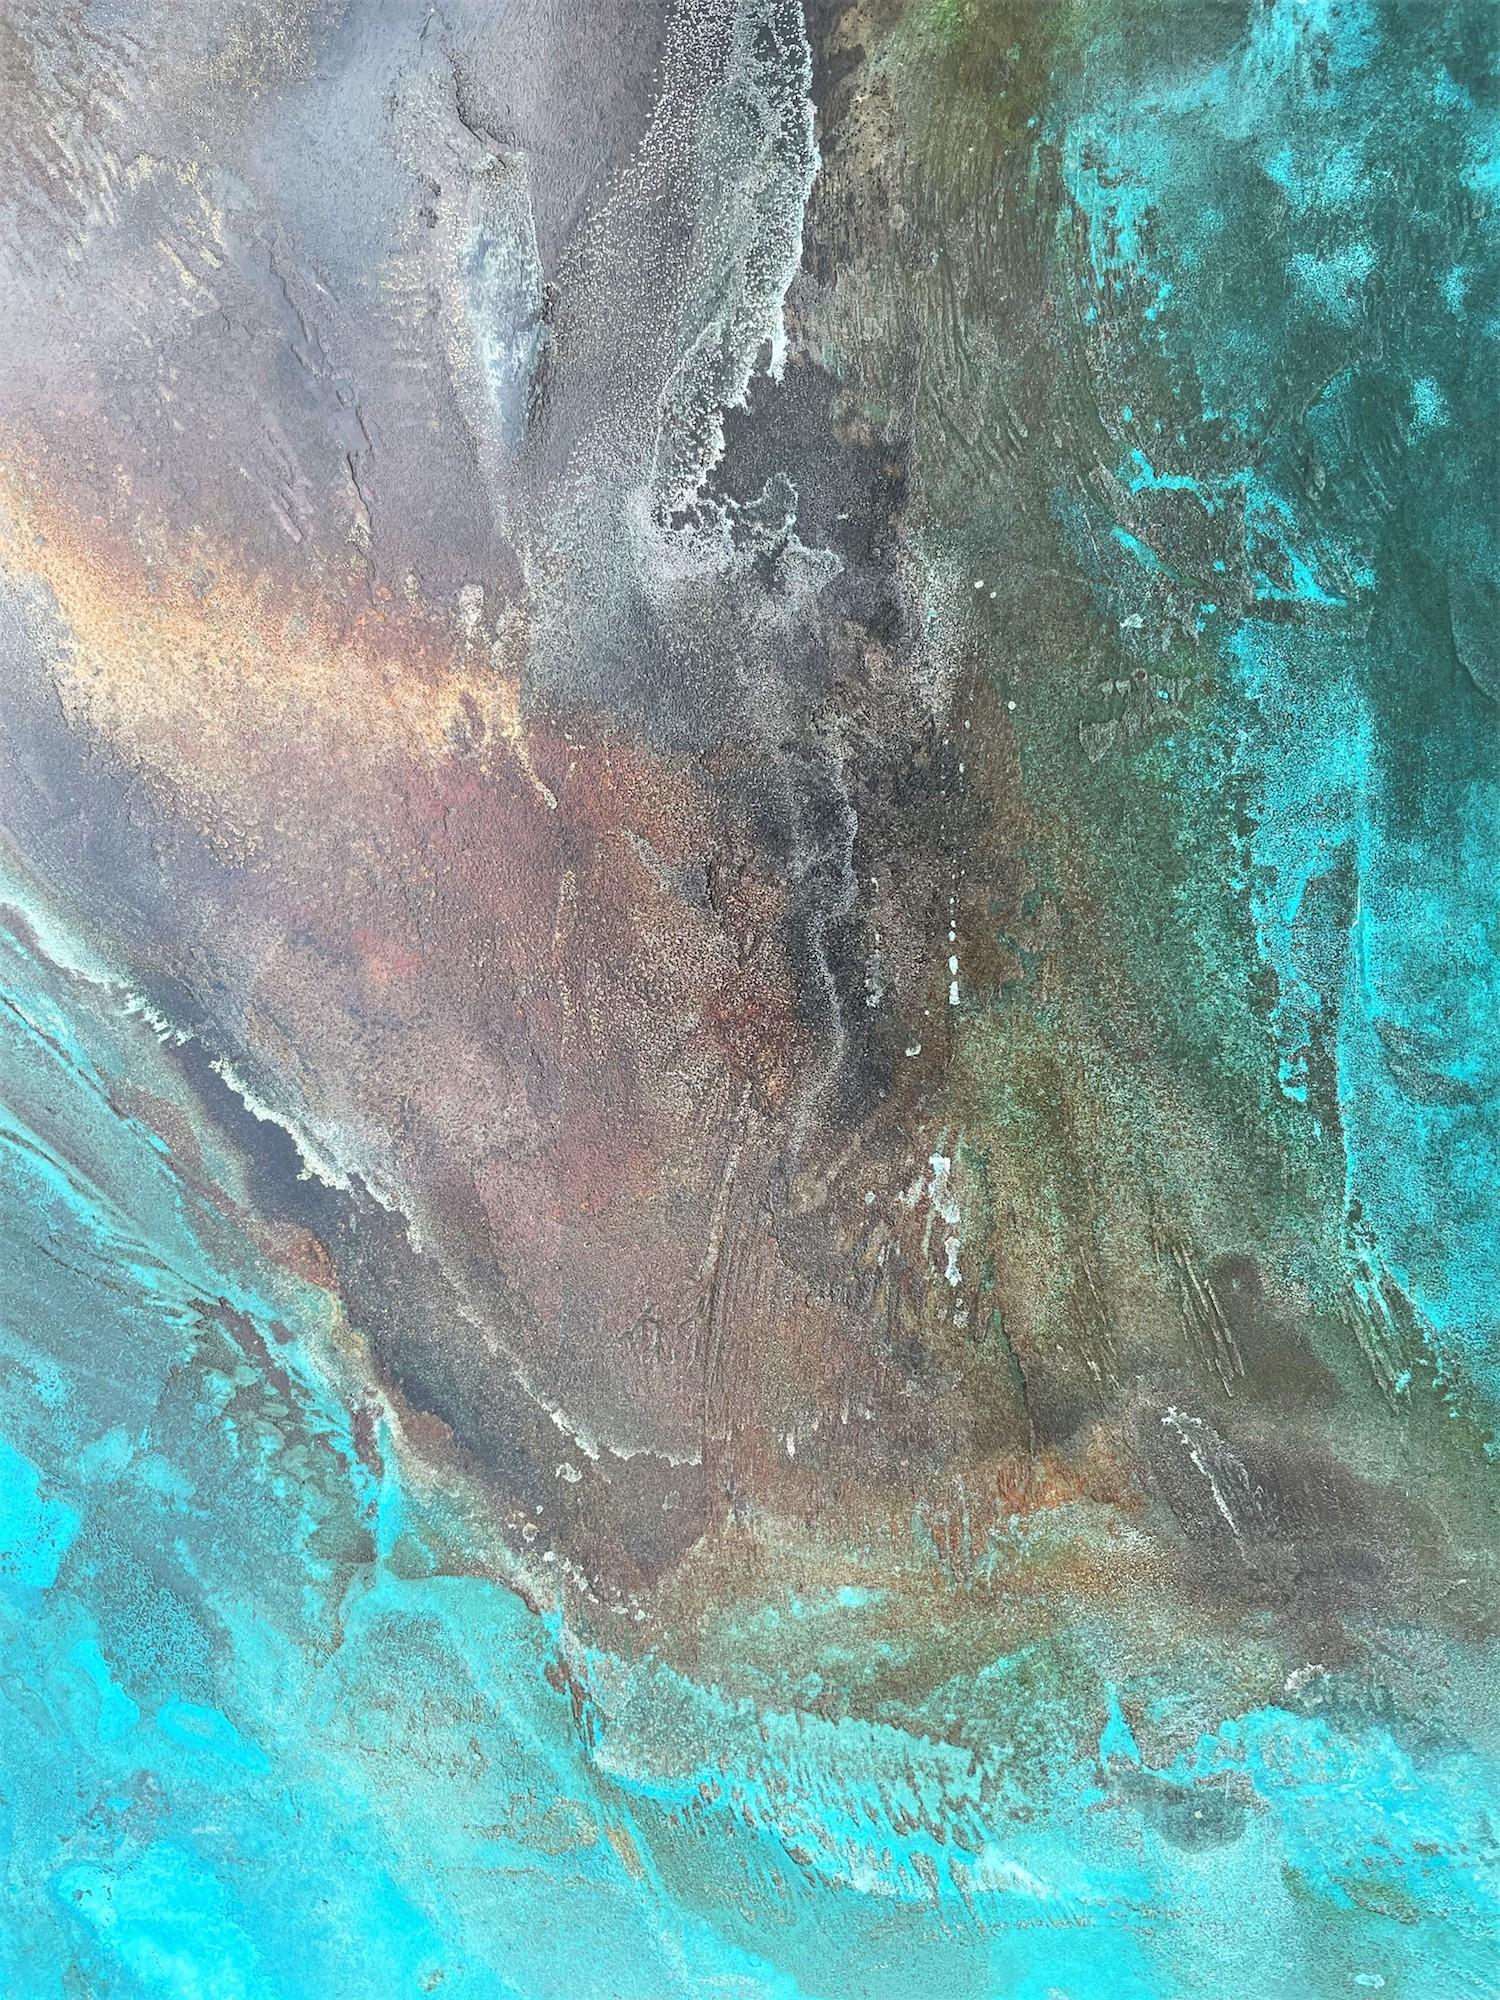 Confluences by Frédérique Domergue - Abstract painting on metal leaves, sea, sky For Sale 5